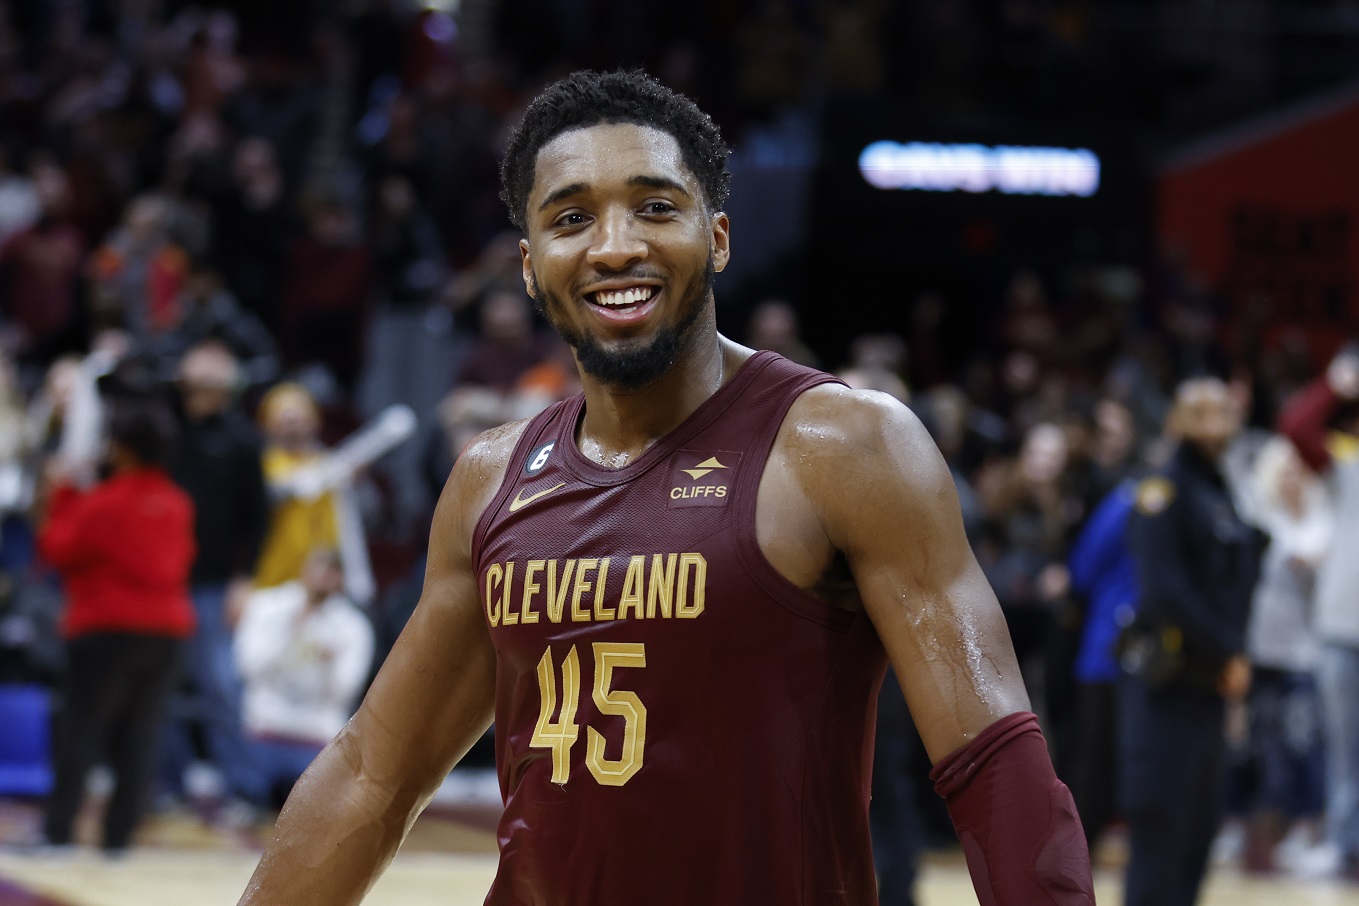 WATCH: Highlights from Cavs guard Donovan Mitchell’s 71-point game against Bulls